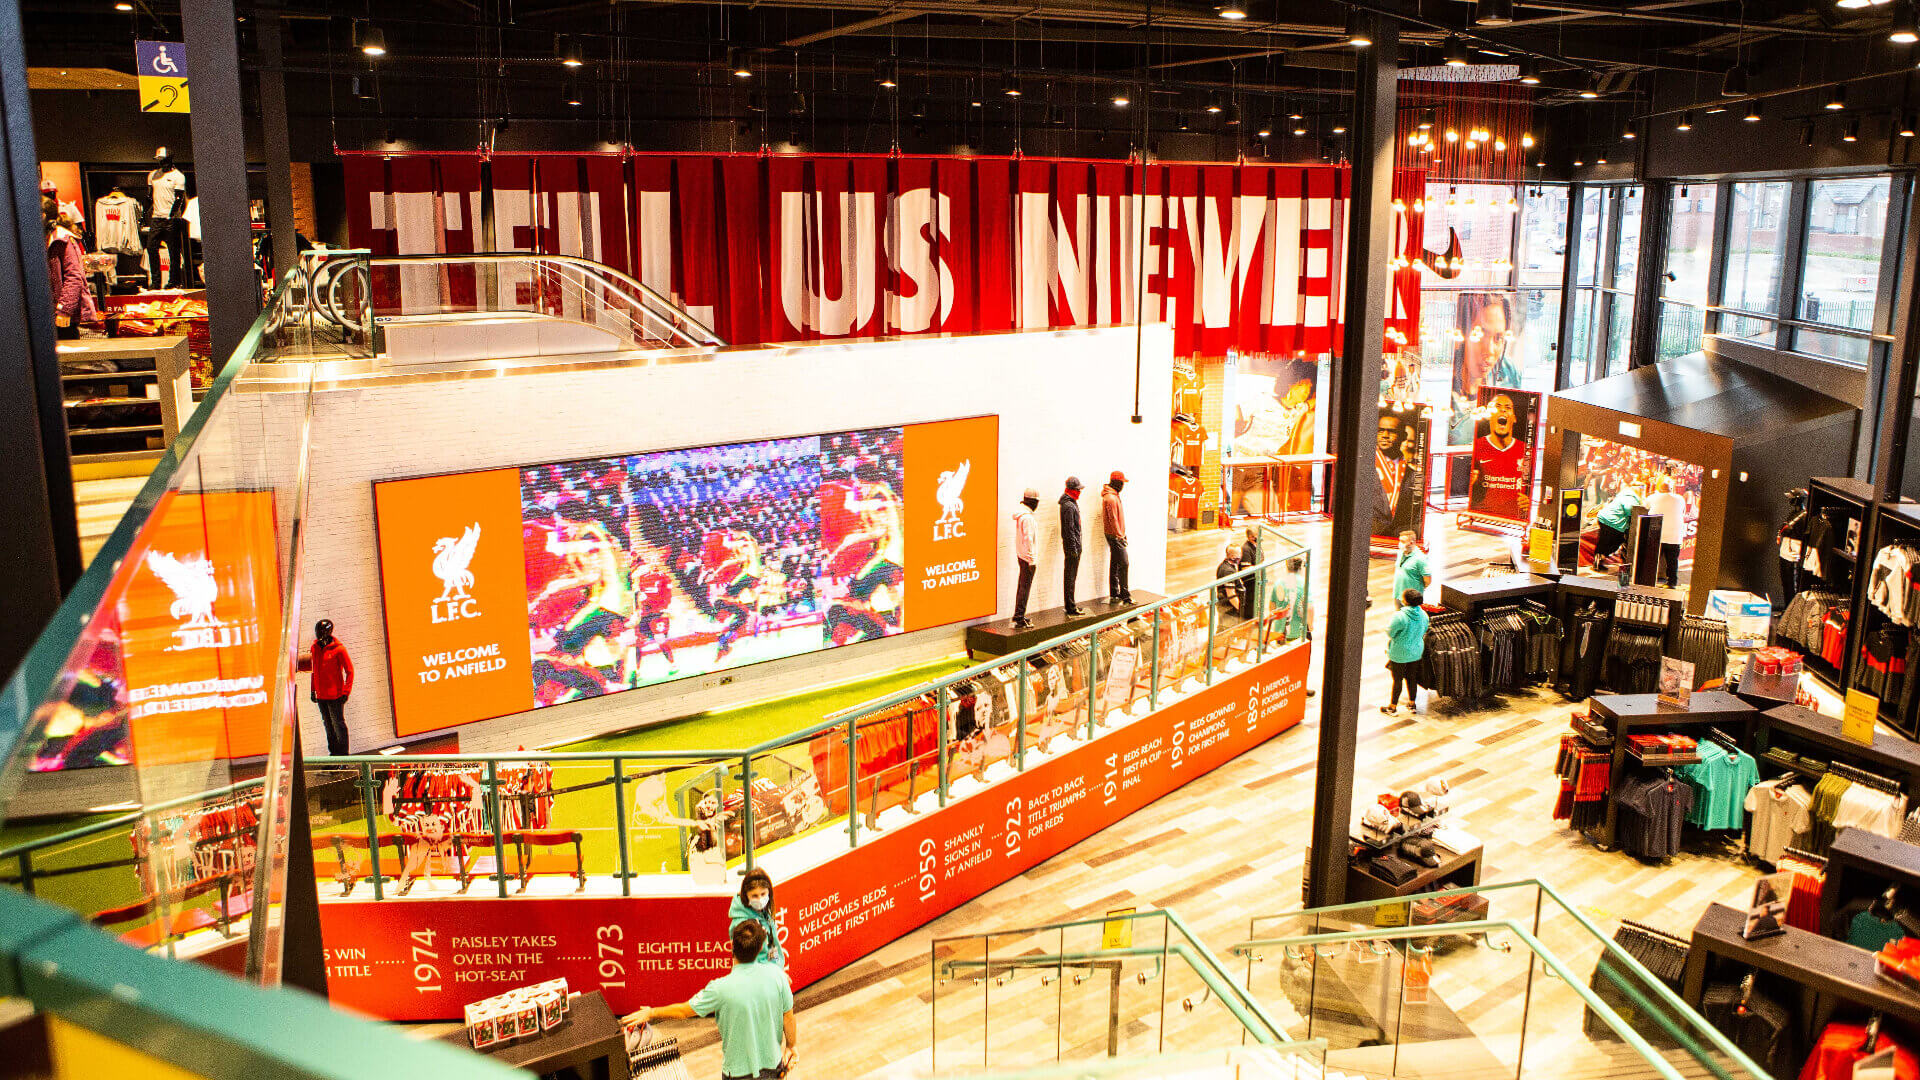 anfield nike shop interior